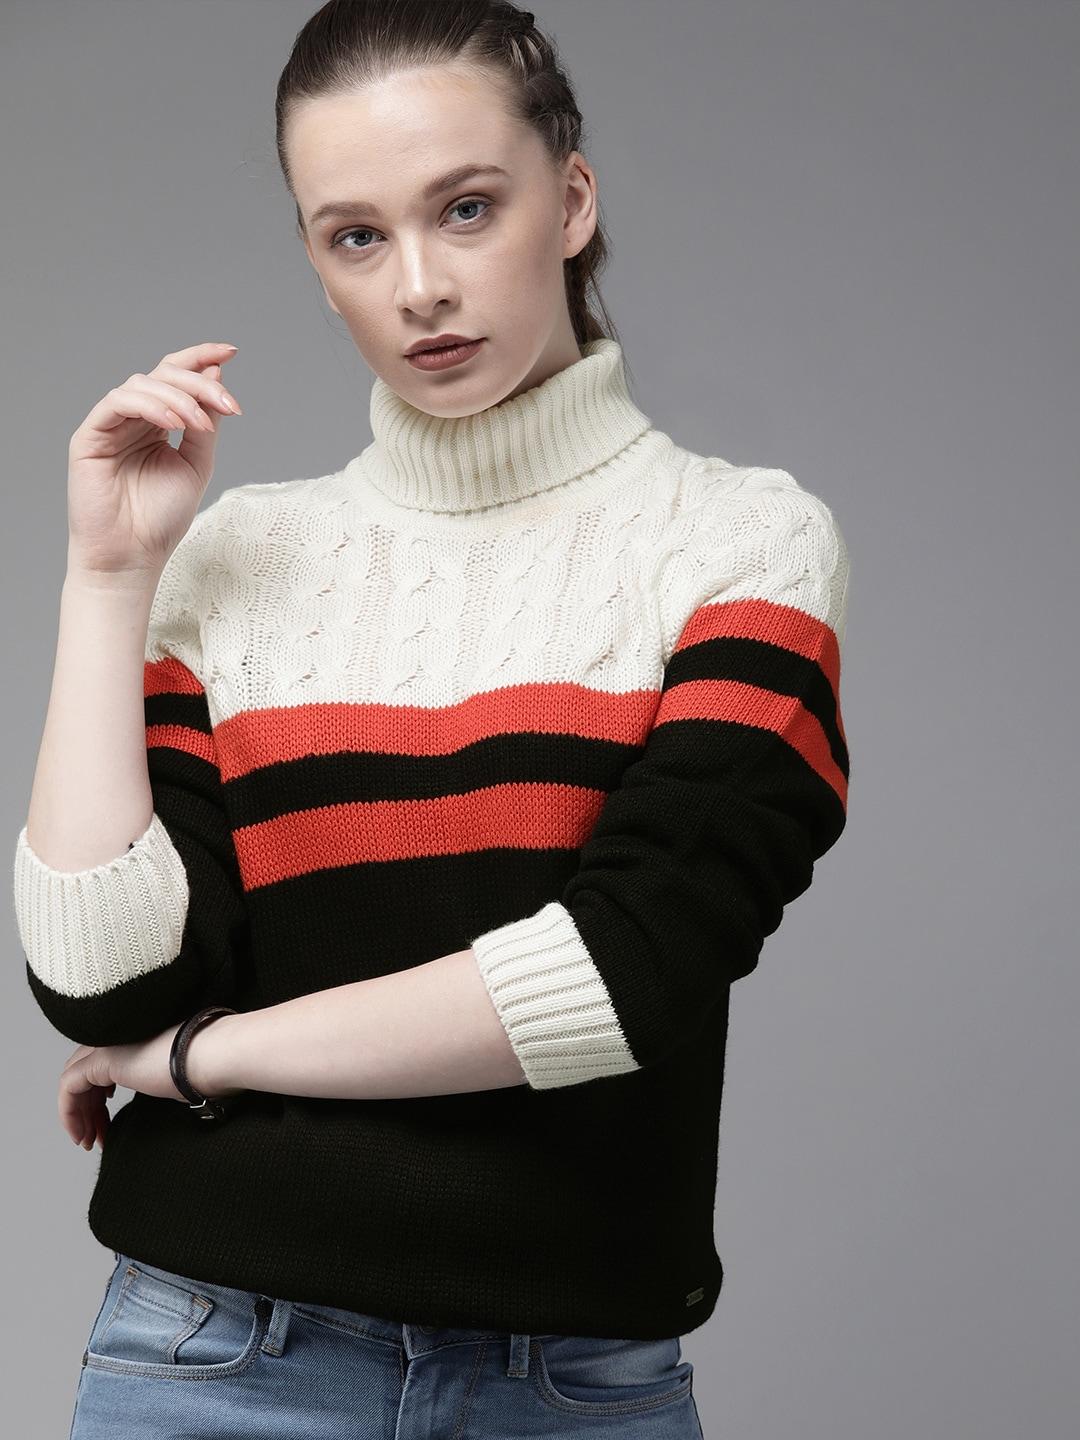 the-roadster-lifestyle-co-women-black-&-red-colourblocked-sweater